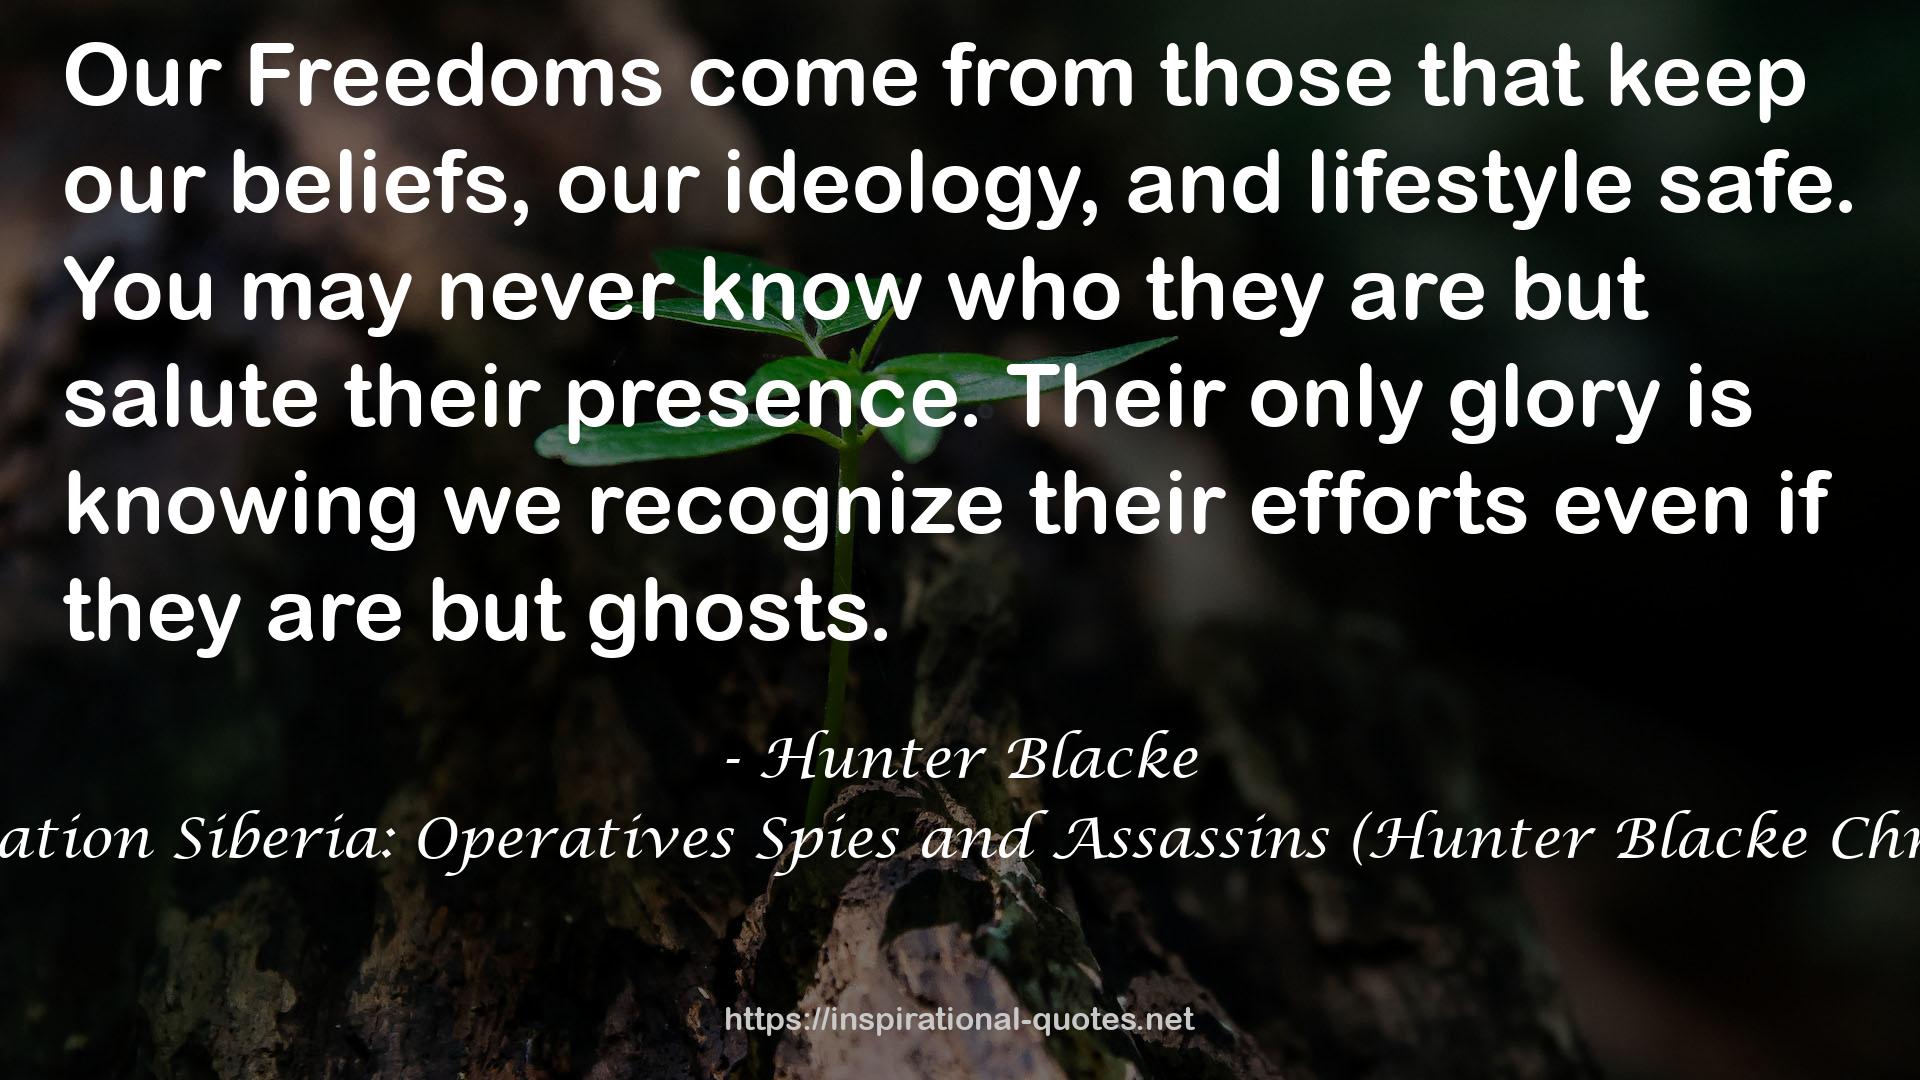 TROIKA: Operation Siberia: Operatives Spies and Assassins (Hunter Blacke Chronicles Book 6) QUOTES